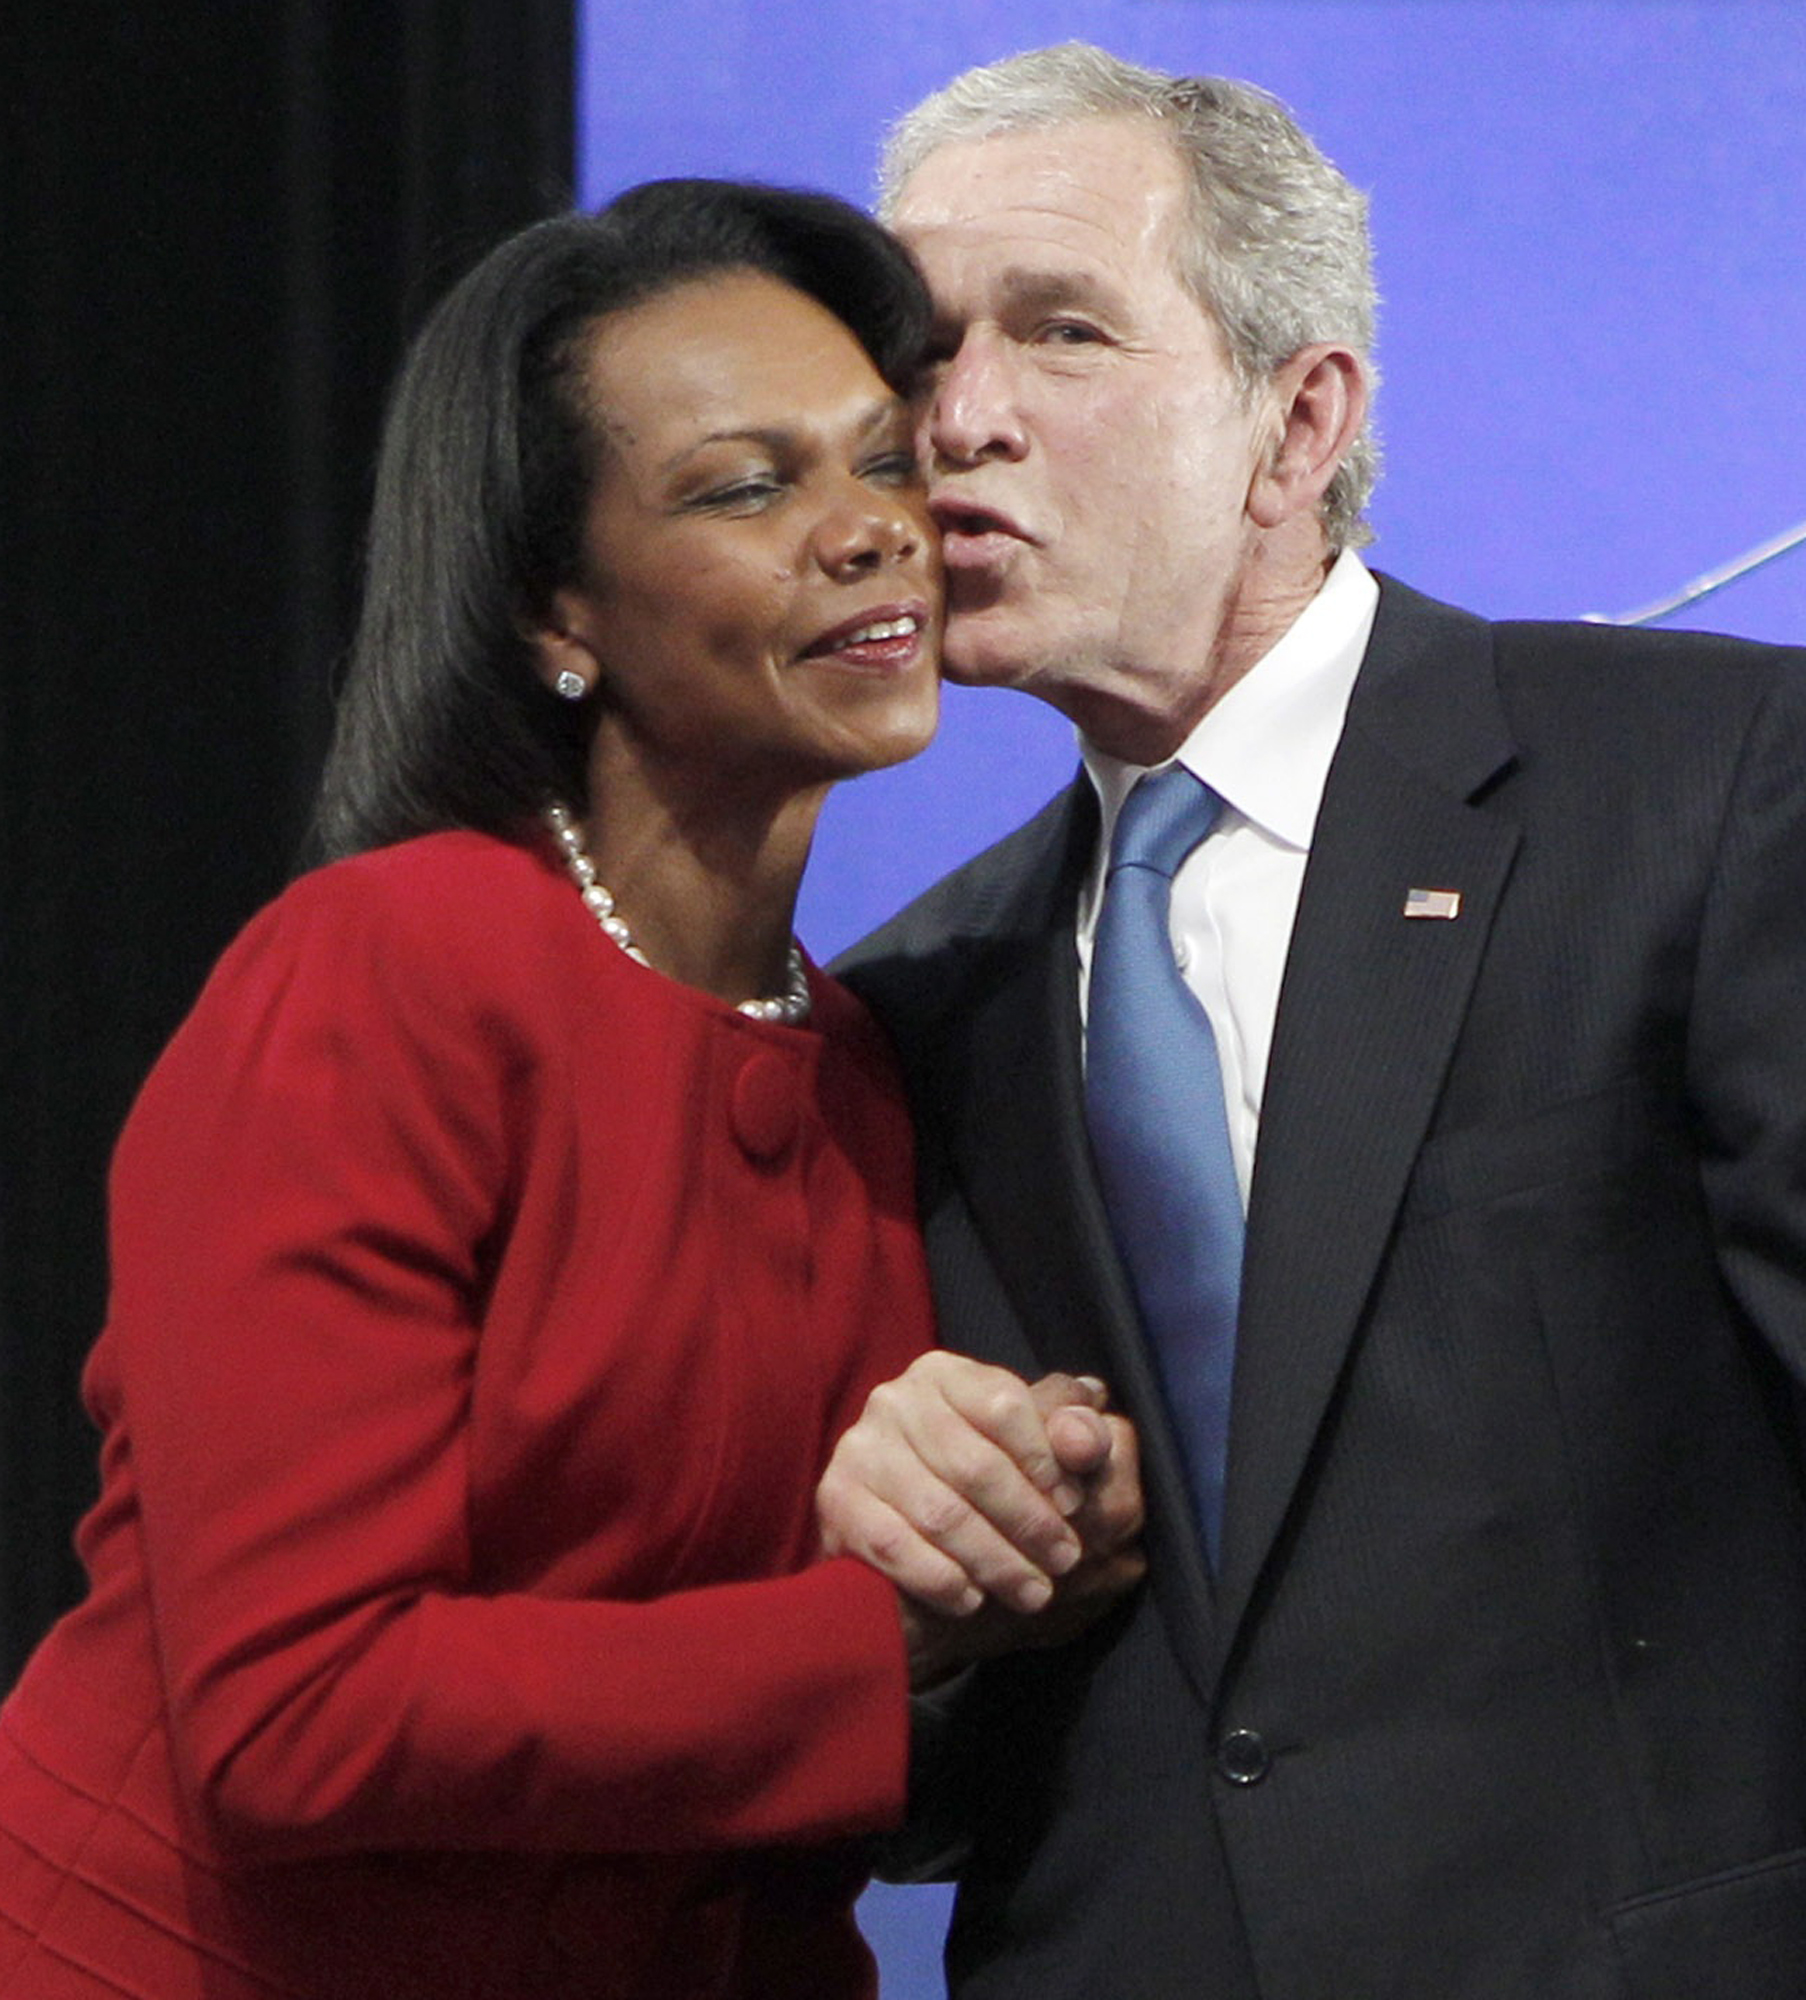 Former President George W. Bush, right, kisses former Secretary of State Condoleezza Rice during the ground breaking ceremony for the President George W. Bush Presidential Center in Dallas on Nov. 16, 2010.